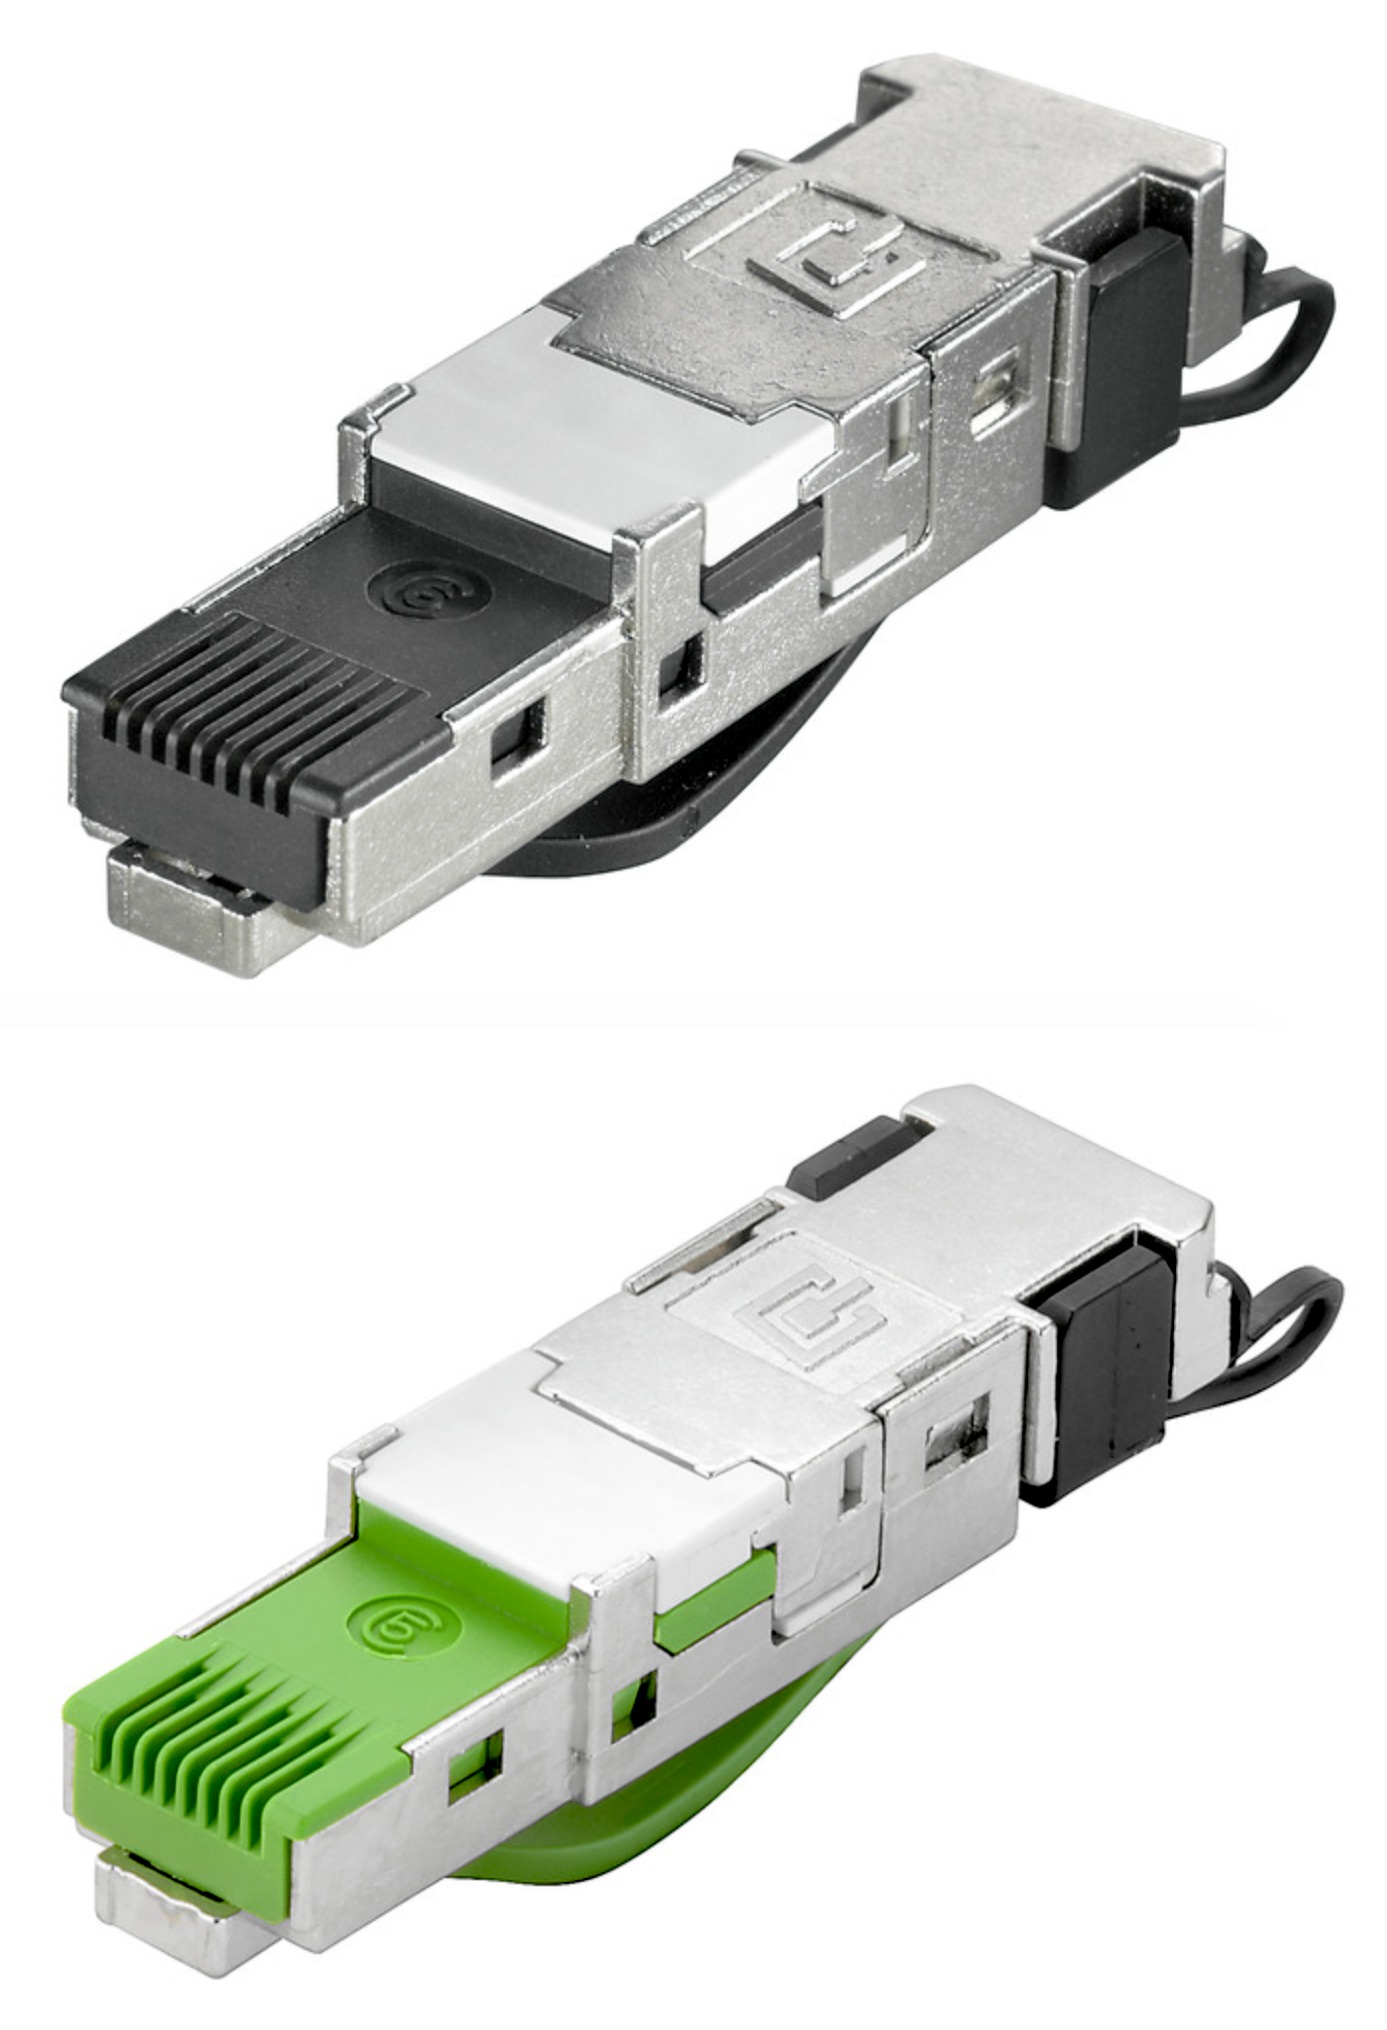 datacom and telecom connectors from Weidmuller